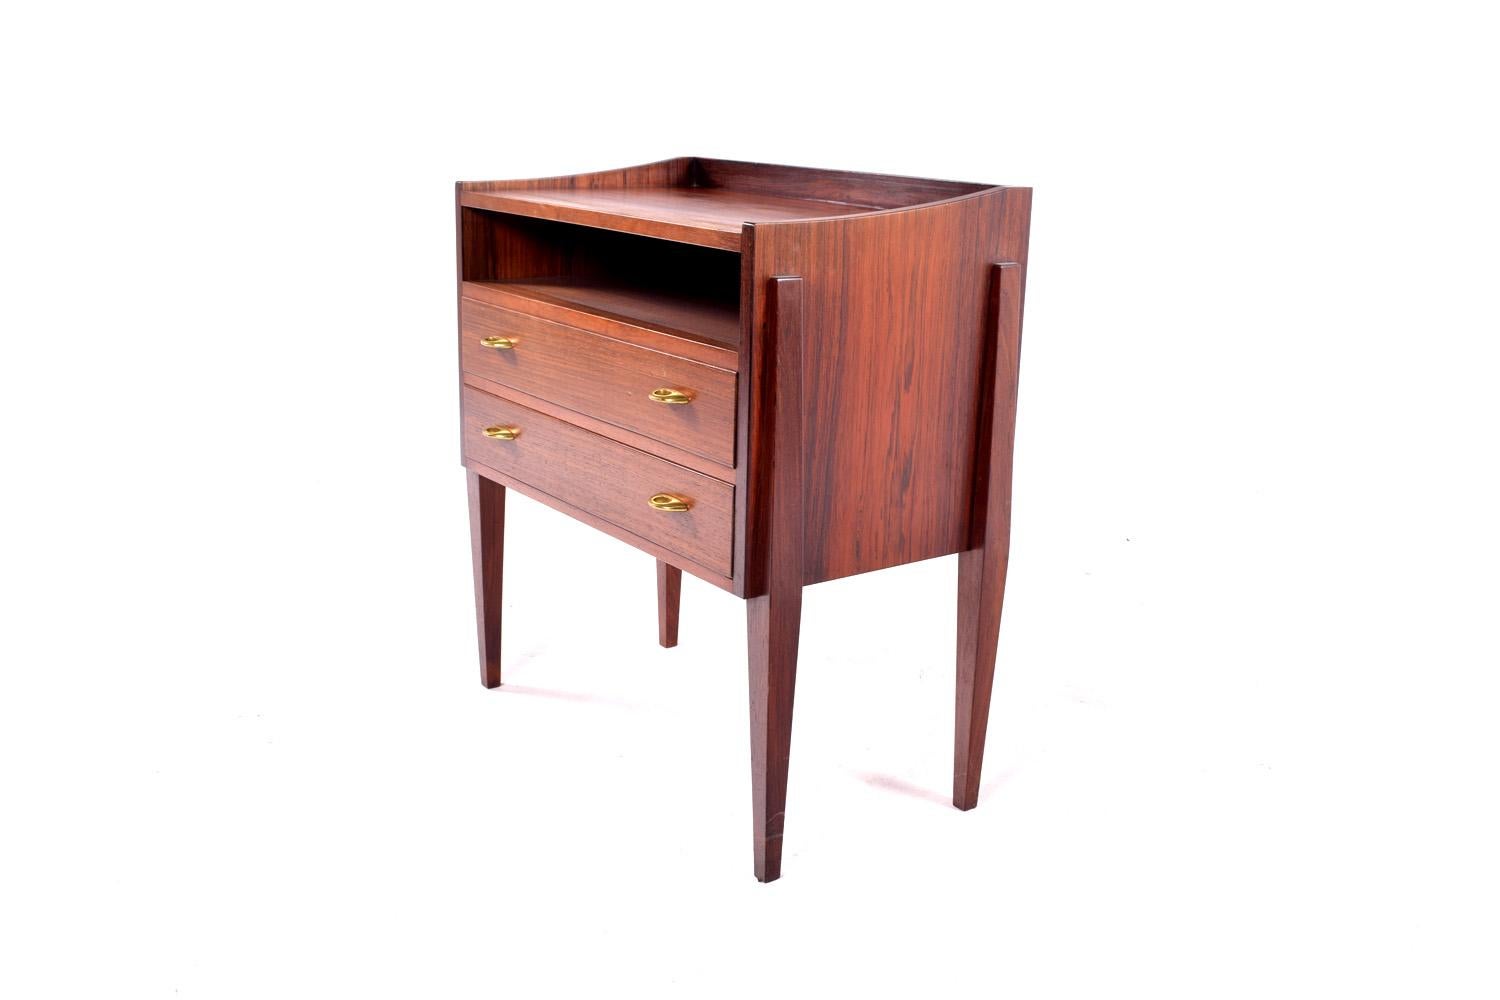 A wonderful rosewood chest of drawers, nightstand or end table by Frode Holm for high end Danish furniture company Illums Bolighus of Denmark. The table features brass pulls and tappered legs with two drawers.